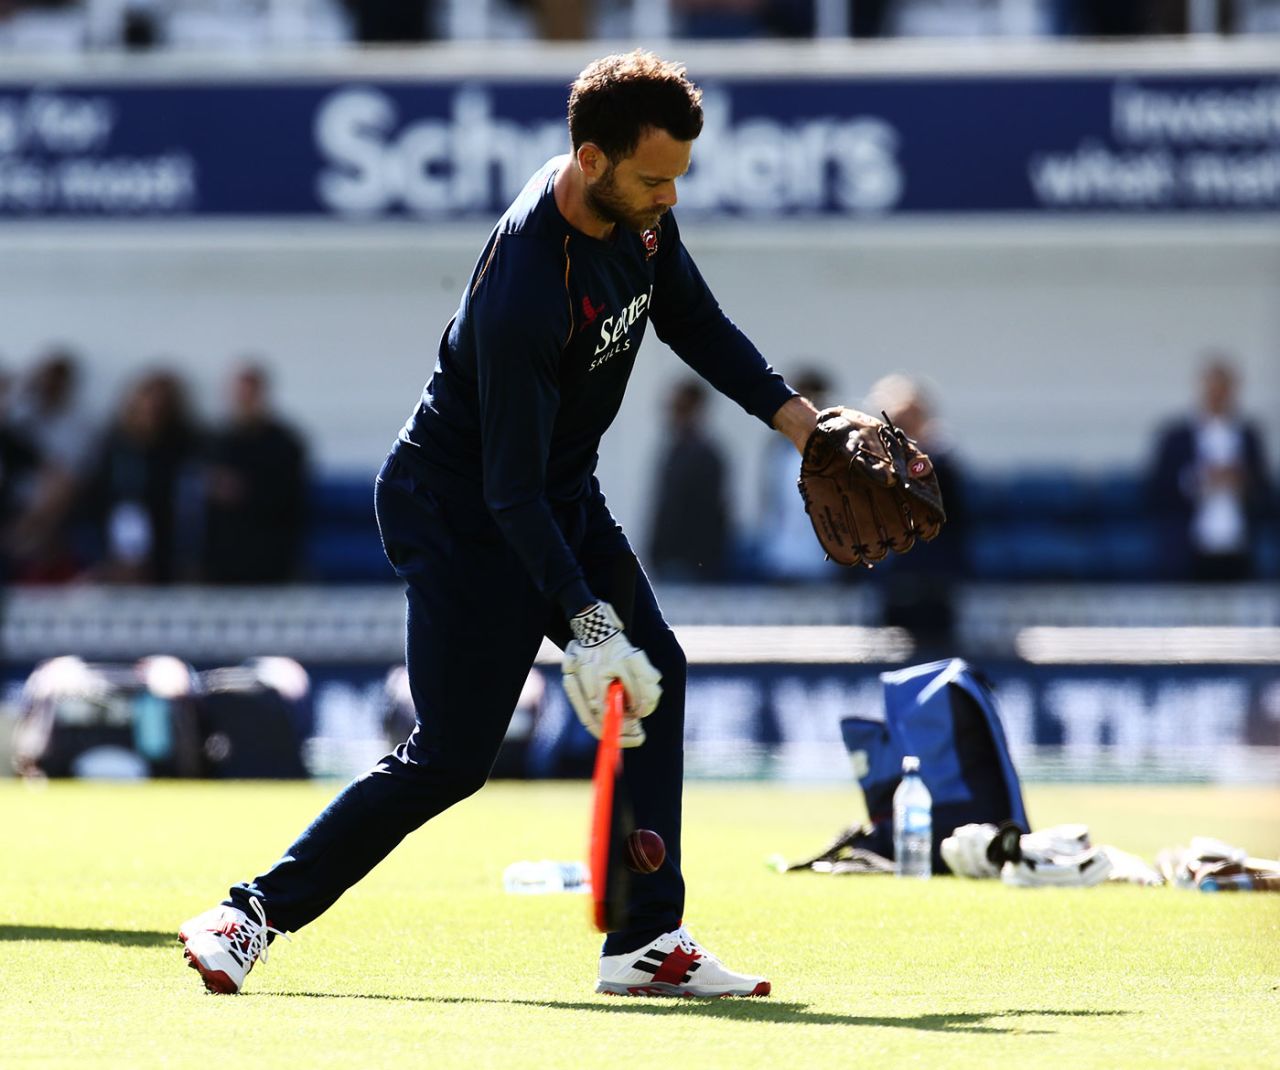 James Foster offers catching practice to England players, England v India, 5th Test, The Oval, 1st day, September 7, 2018